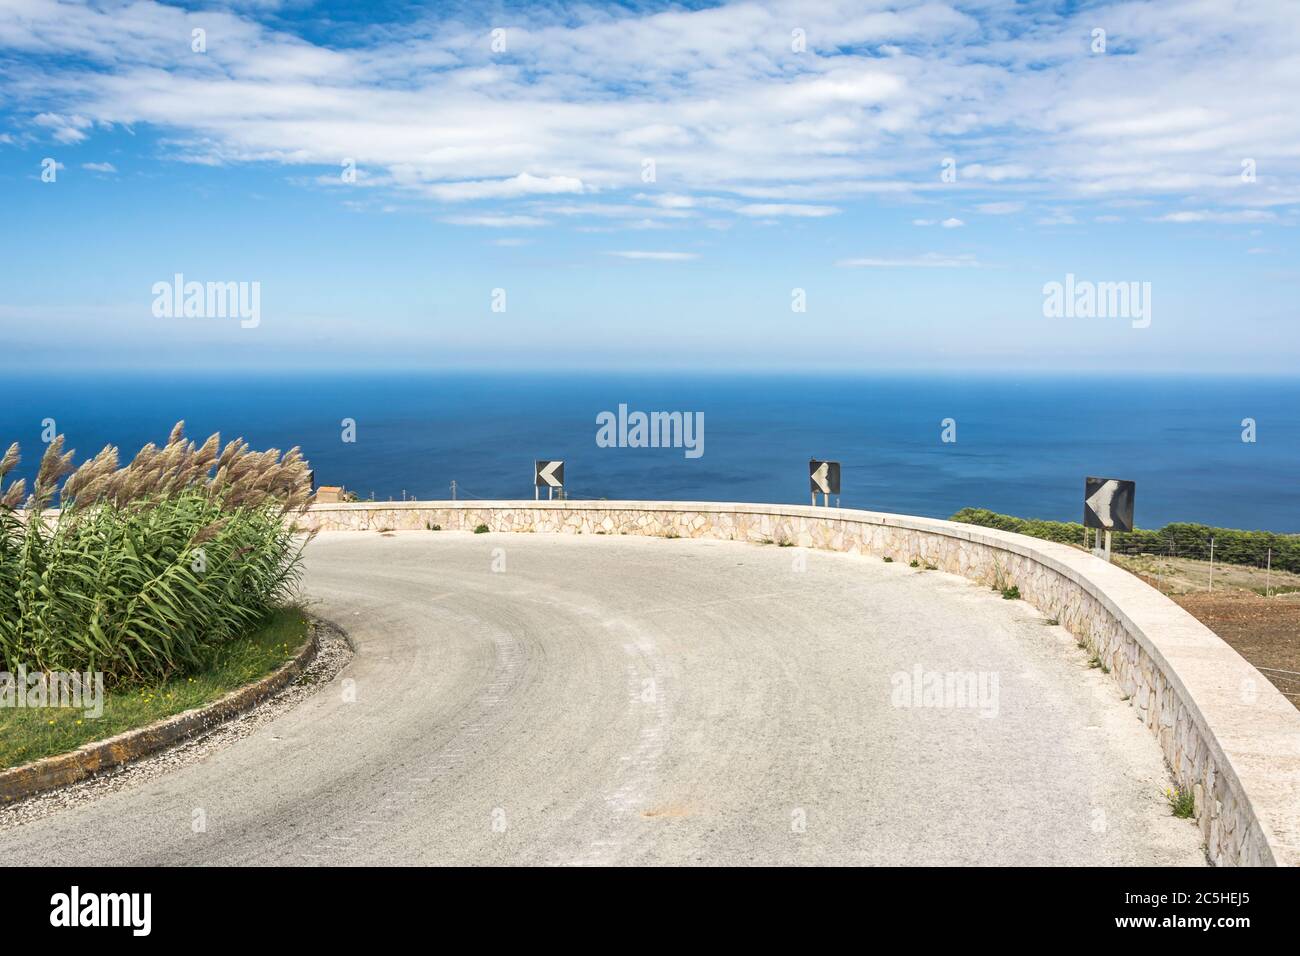 Scenic curvy coastal road with blue ocean in the background Stock Photo